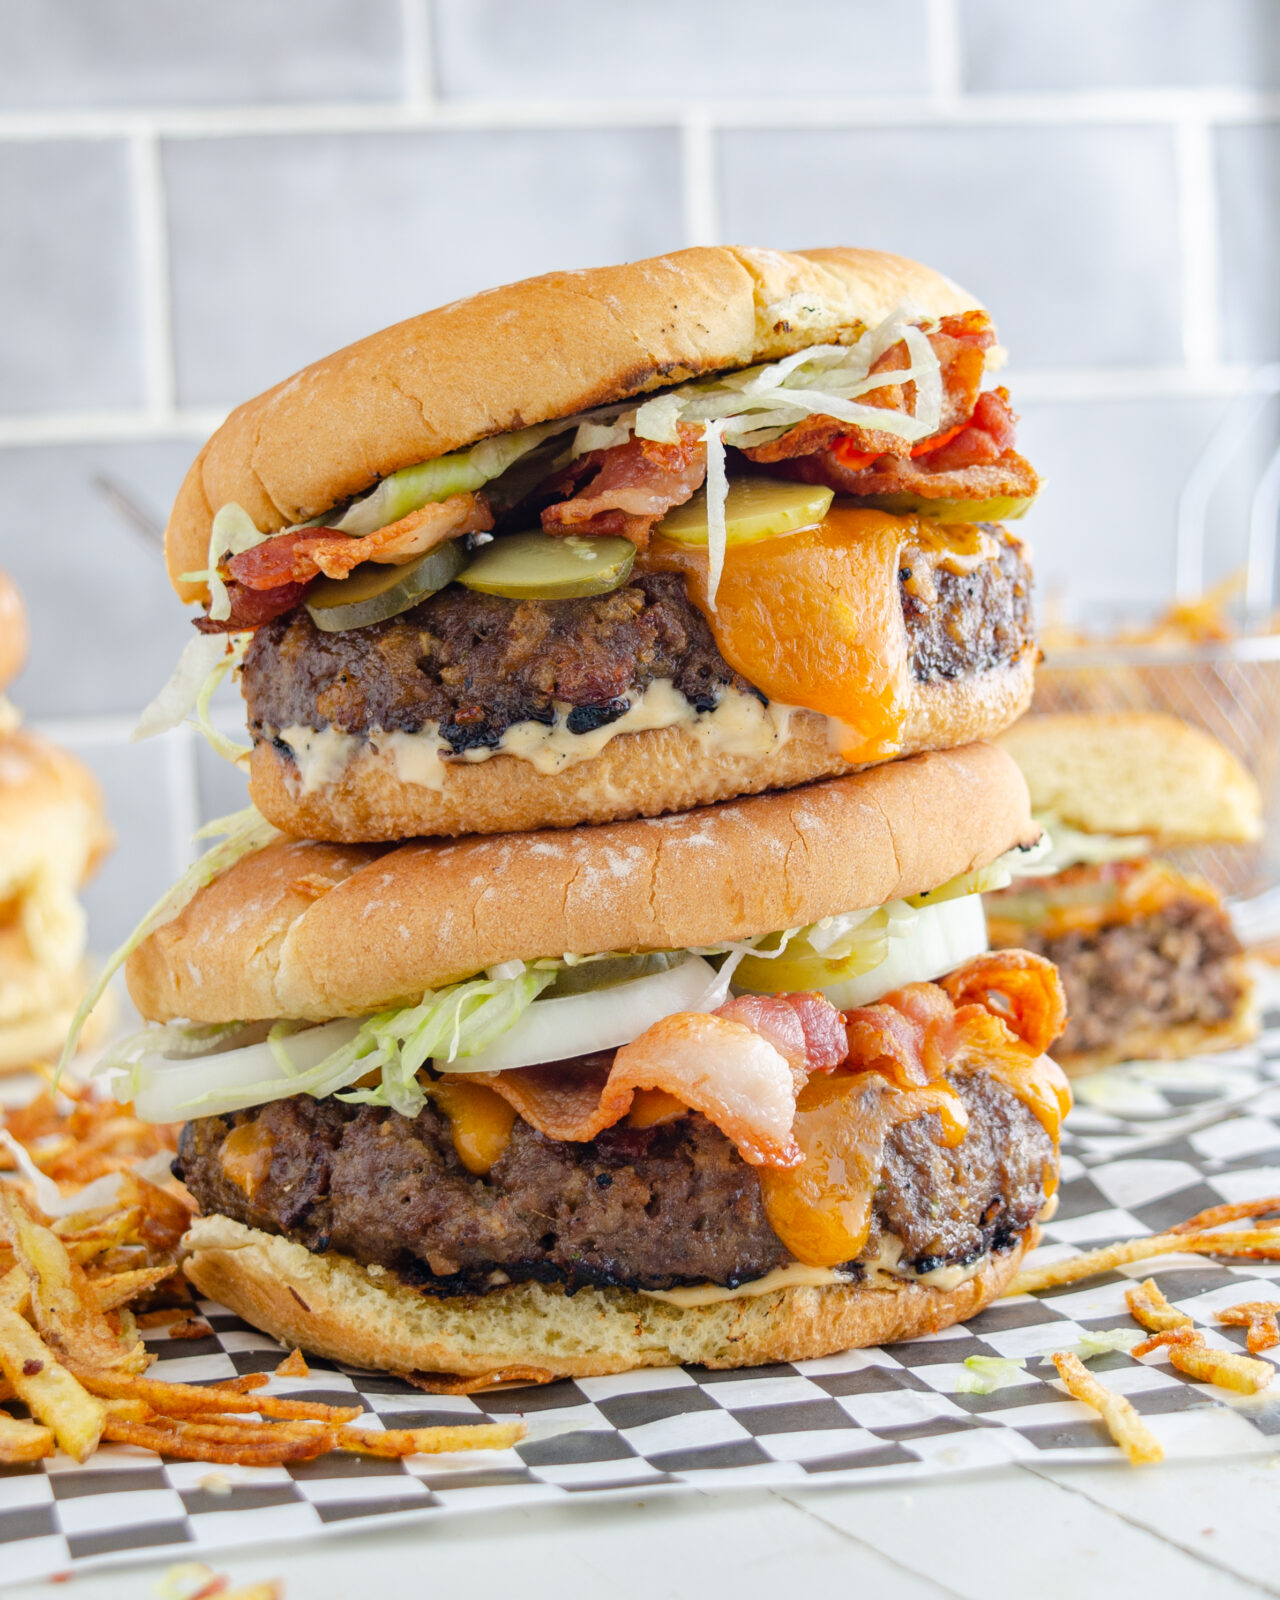 Two massive burgers stacked on top of each other